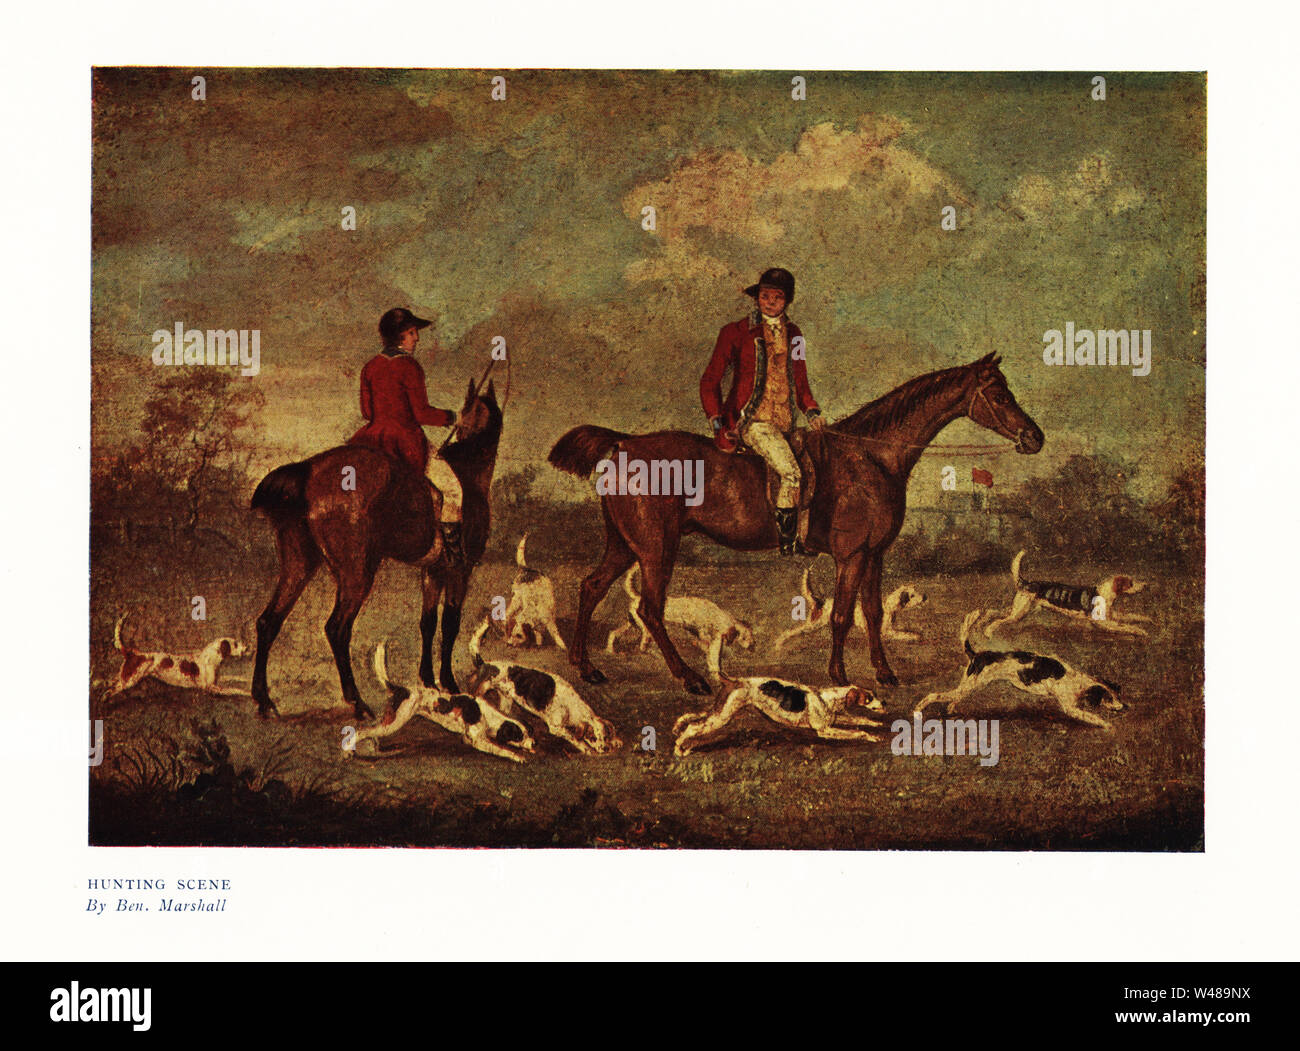 Hunting scene. Two mounted hunters in scarlet jackets with hounds, Regency Era. Color print after a painting by Benjamin Marshall in Ralph Nevill’s Old Sporting Prints, The Connoisseur Magazine, London, 1908. Stock Photo